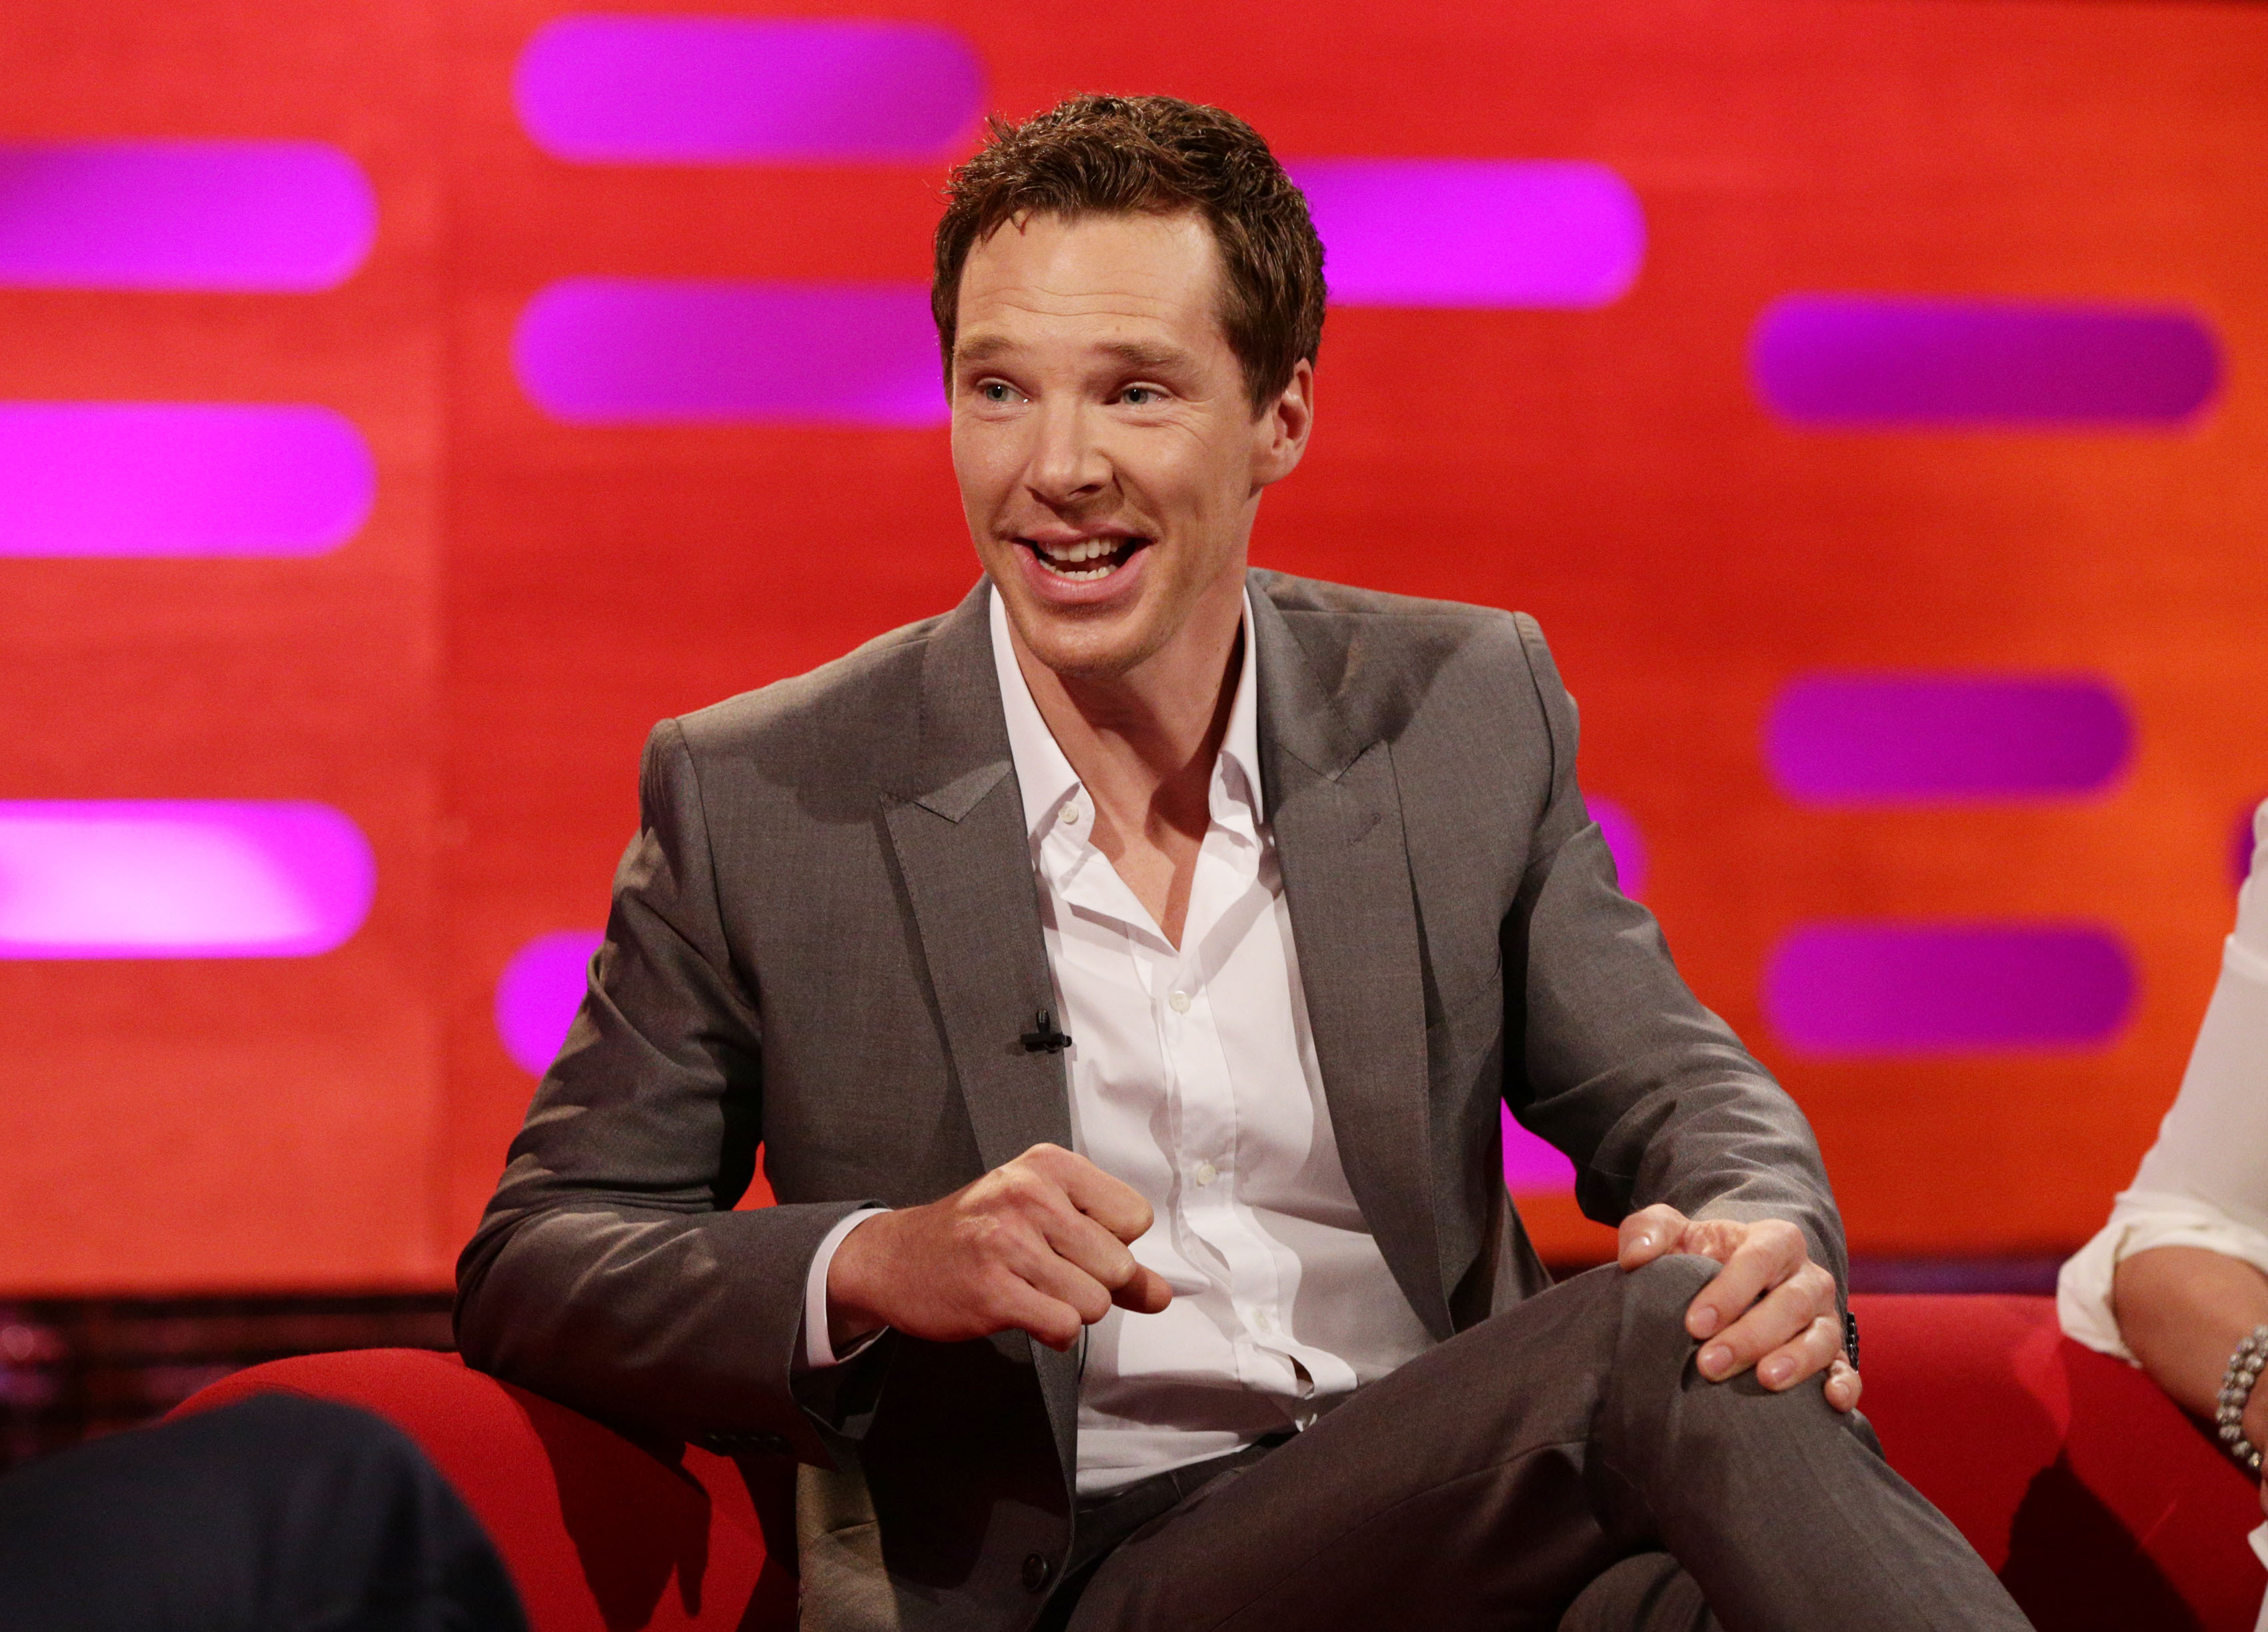 Graham Norton Show - London. Benedict Cumberbatch during filming of the Graham Norton Show at the London Studios, London, to be aired on BBC One on Friday evening. Picture date: Thursday October 23, 2014. Photo credit should read: Yui Mok/PA Wire URN:21270396 (Yui Mok&mdash;PA Wire/Press Association Images)